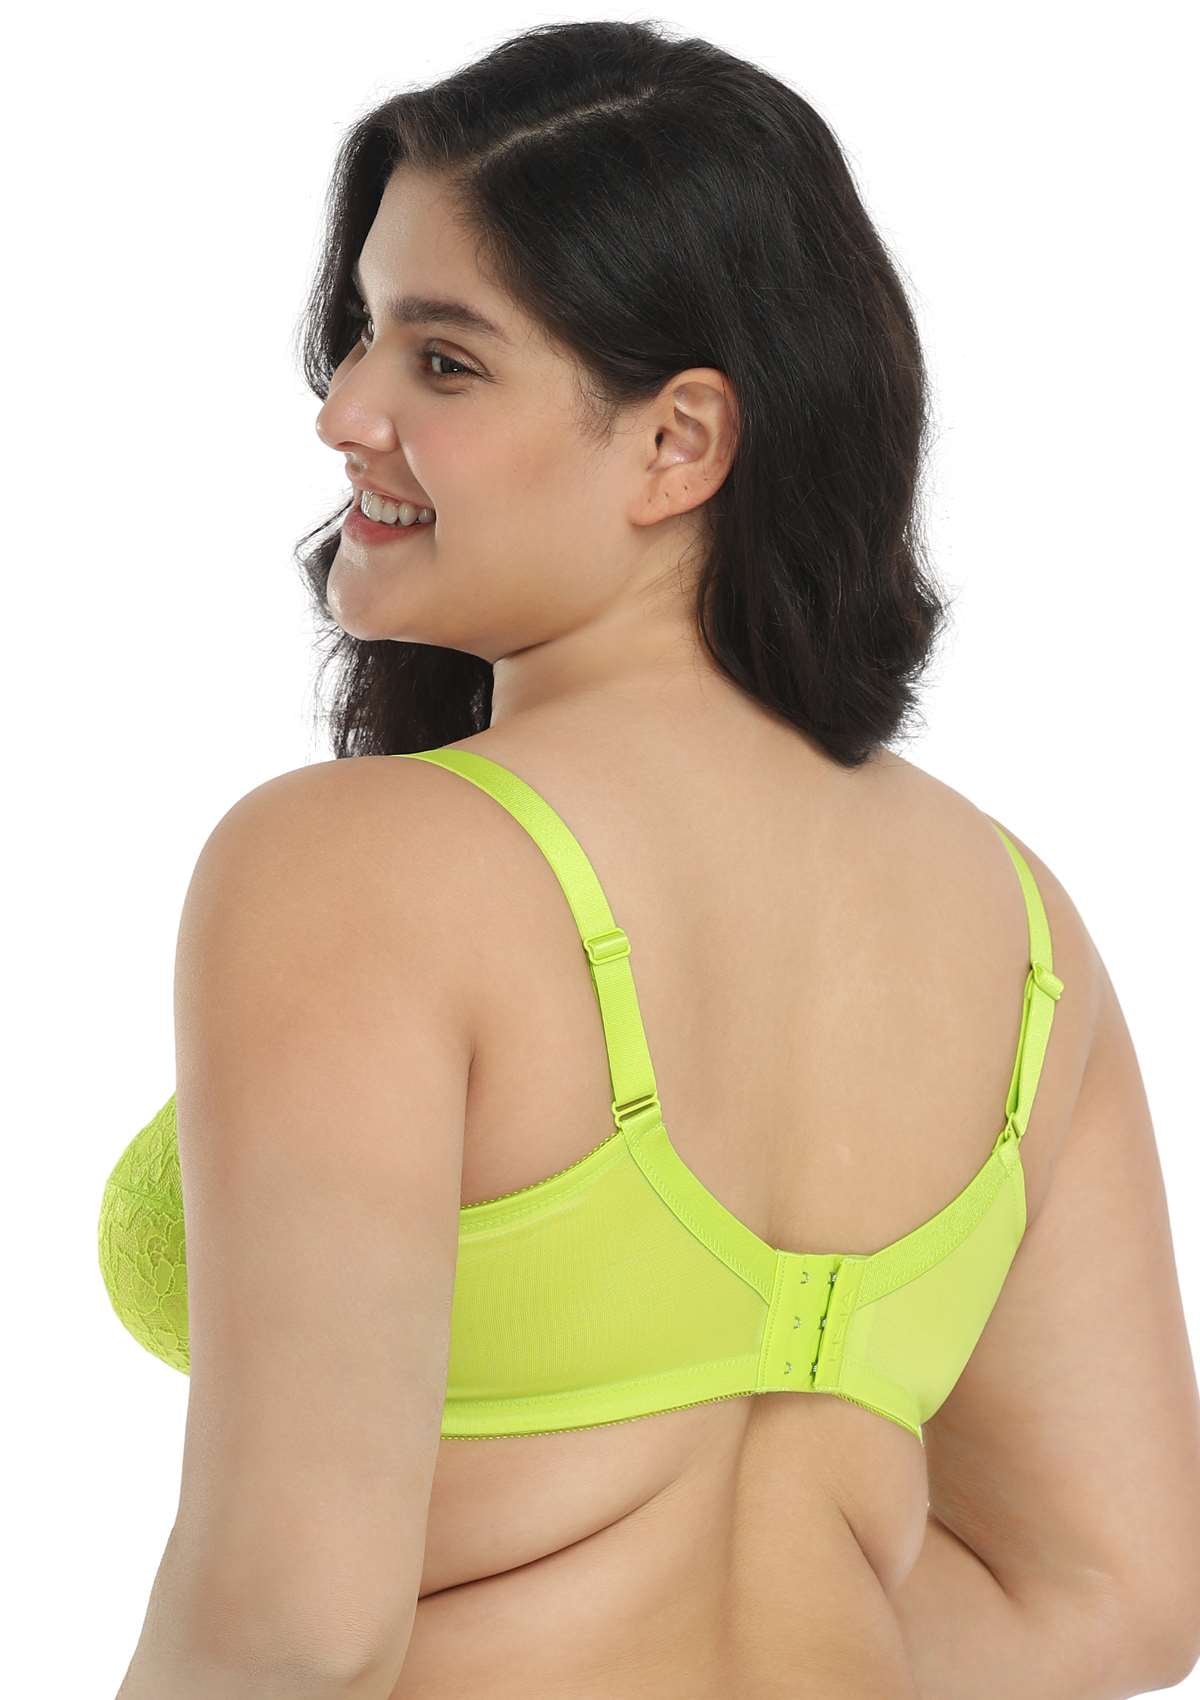 HSIA Enchante Full Cup Minimizing Bra: Supportive Unlined Lace Bra - Lime Green / 34 / G